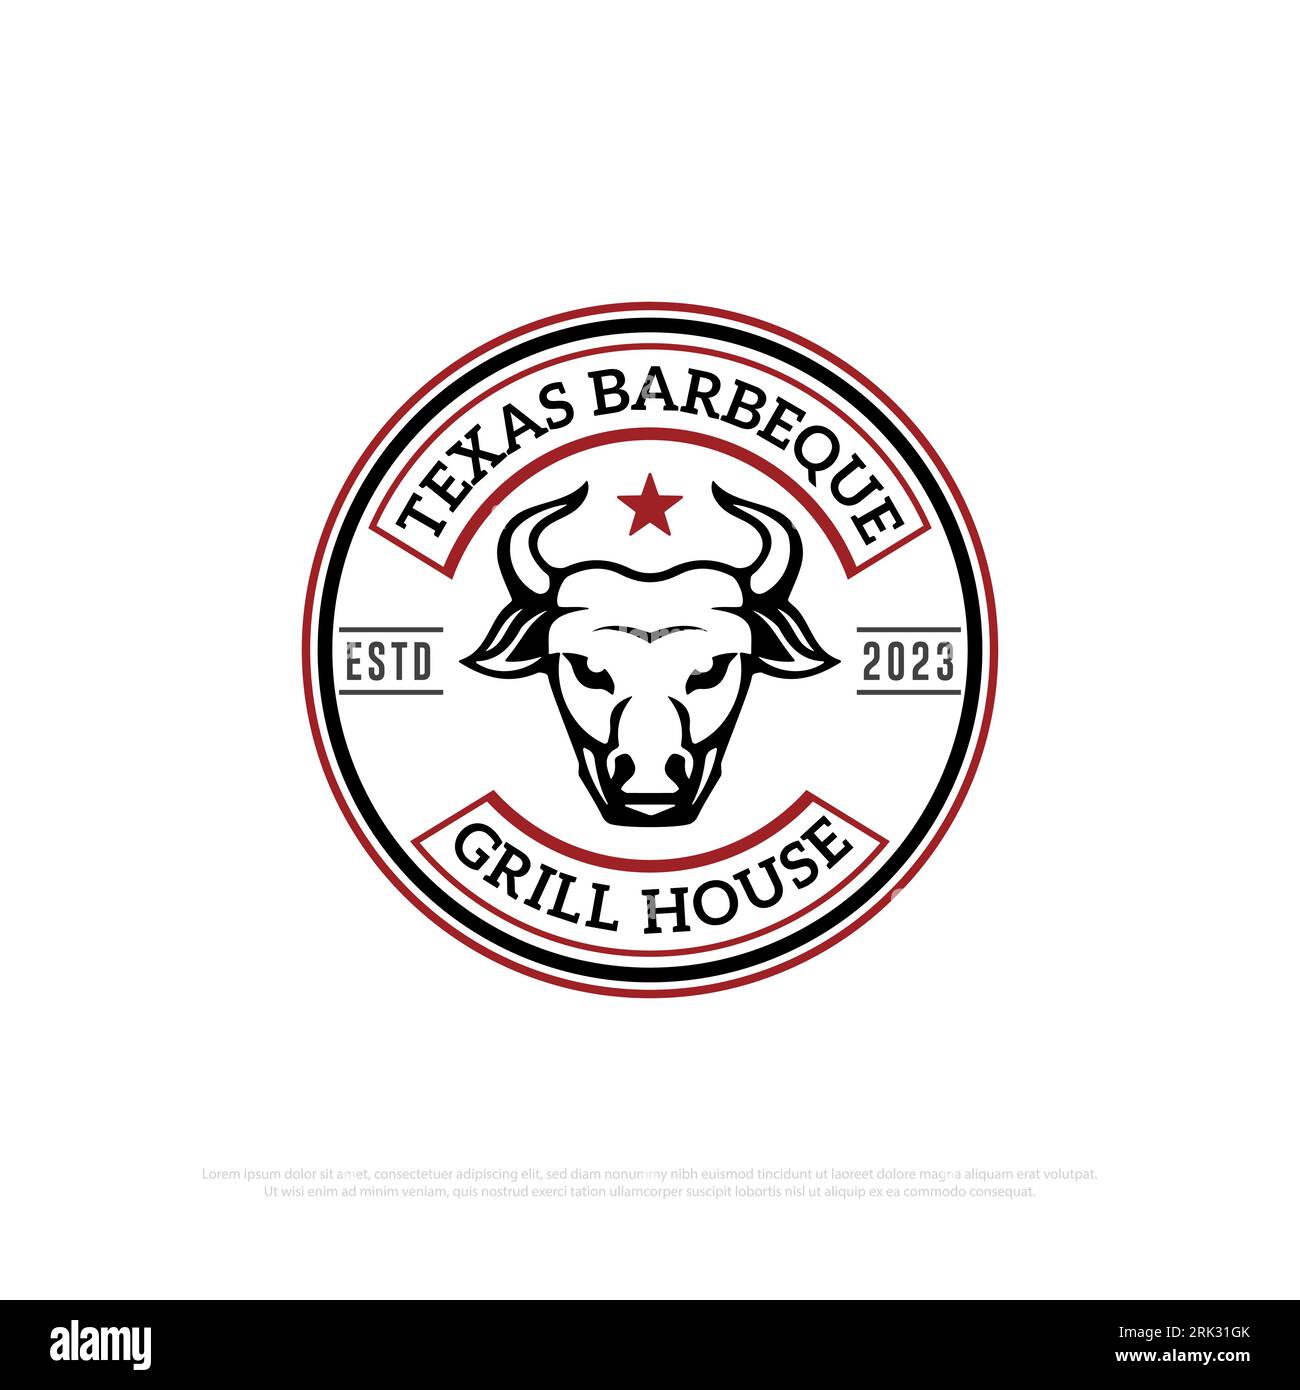 Texas Barbeque Grill house logo design vector, retro grill house and bar or restaurant icon vector illustrations emblem template Stock Vector